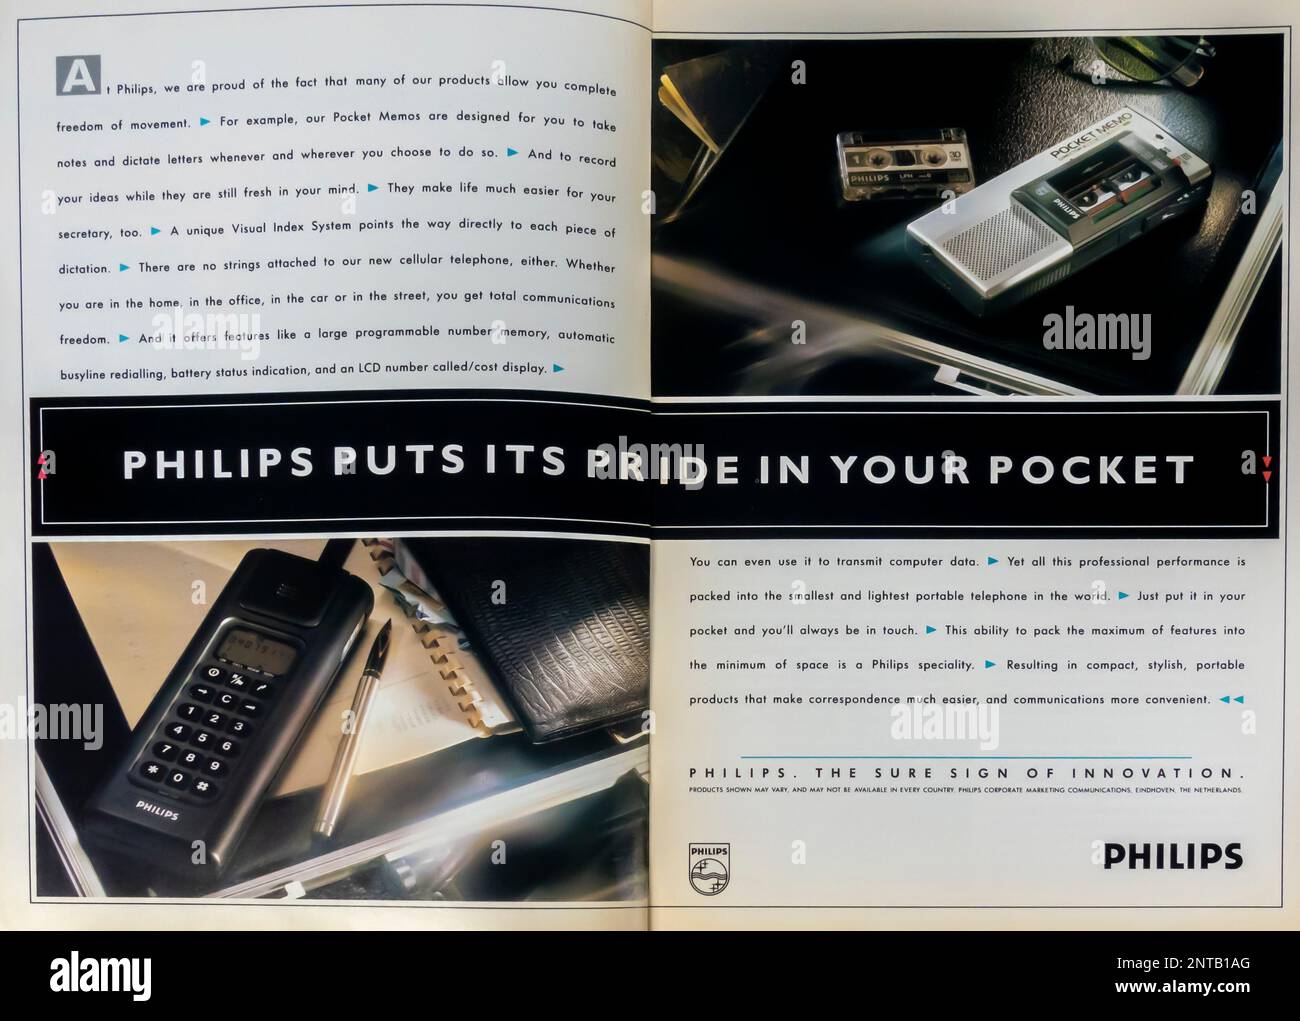 Philips electronics - cellular phone, cell phone, dictaphone advertisement  placed inside a NatGeo magazine, January 1989 Stock Photo